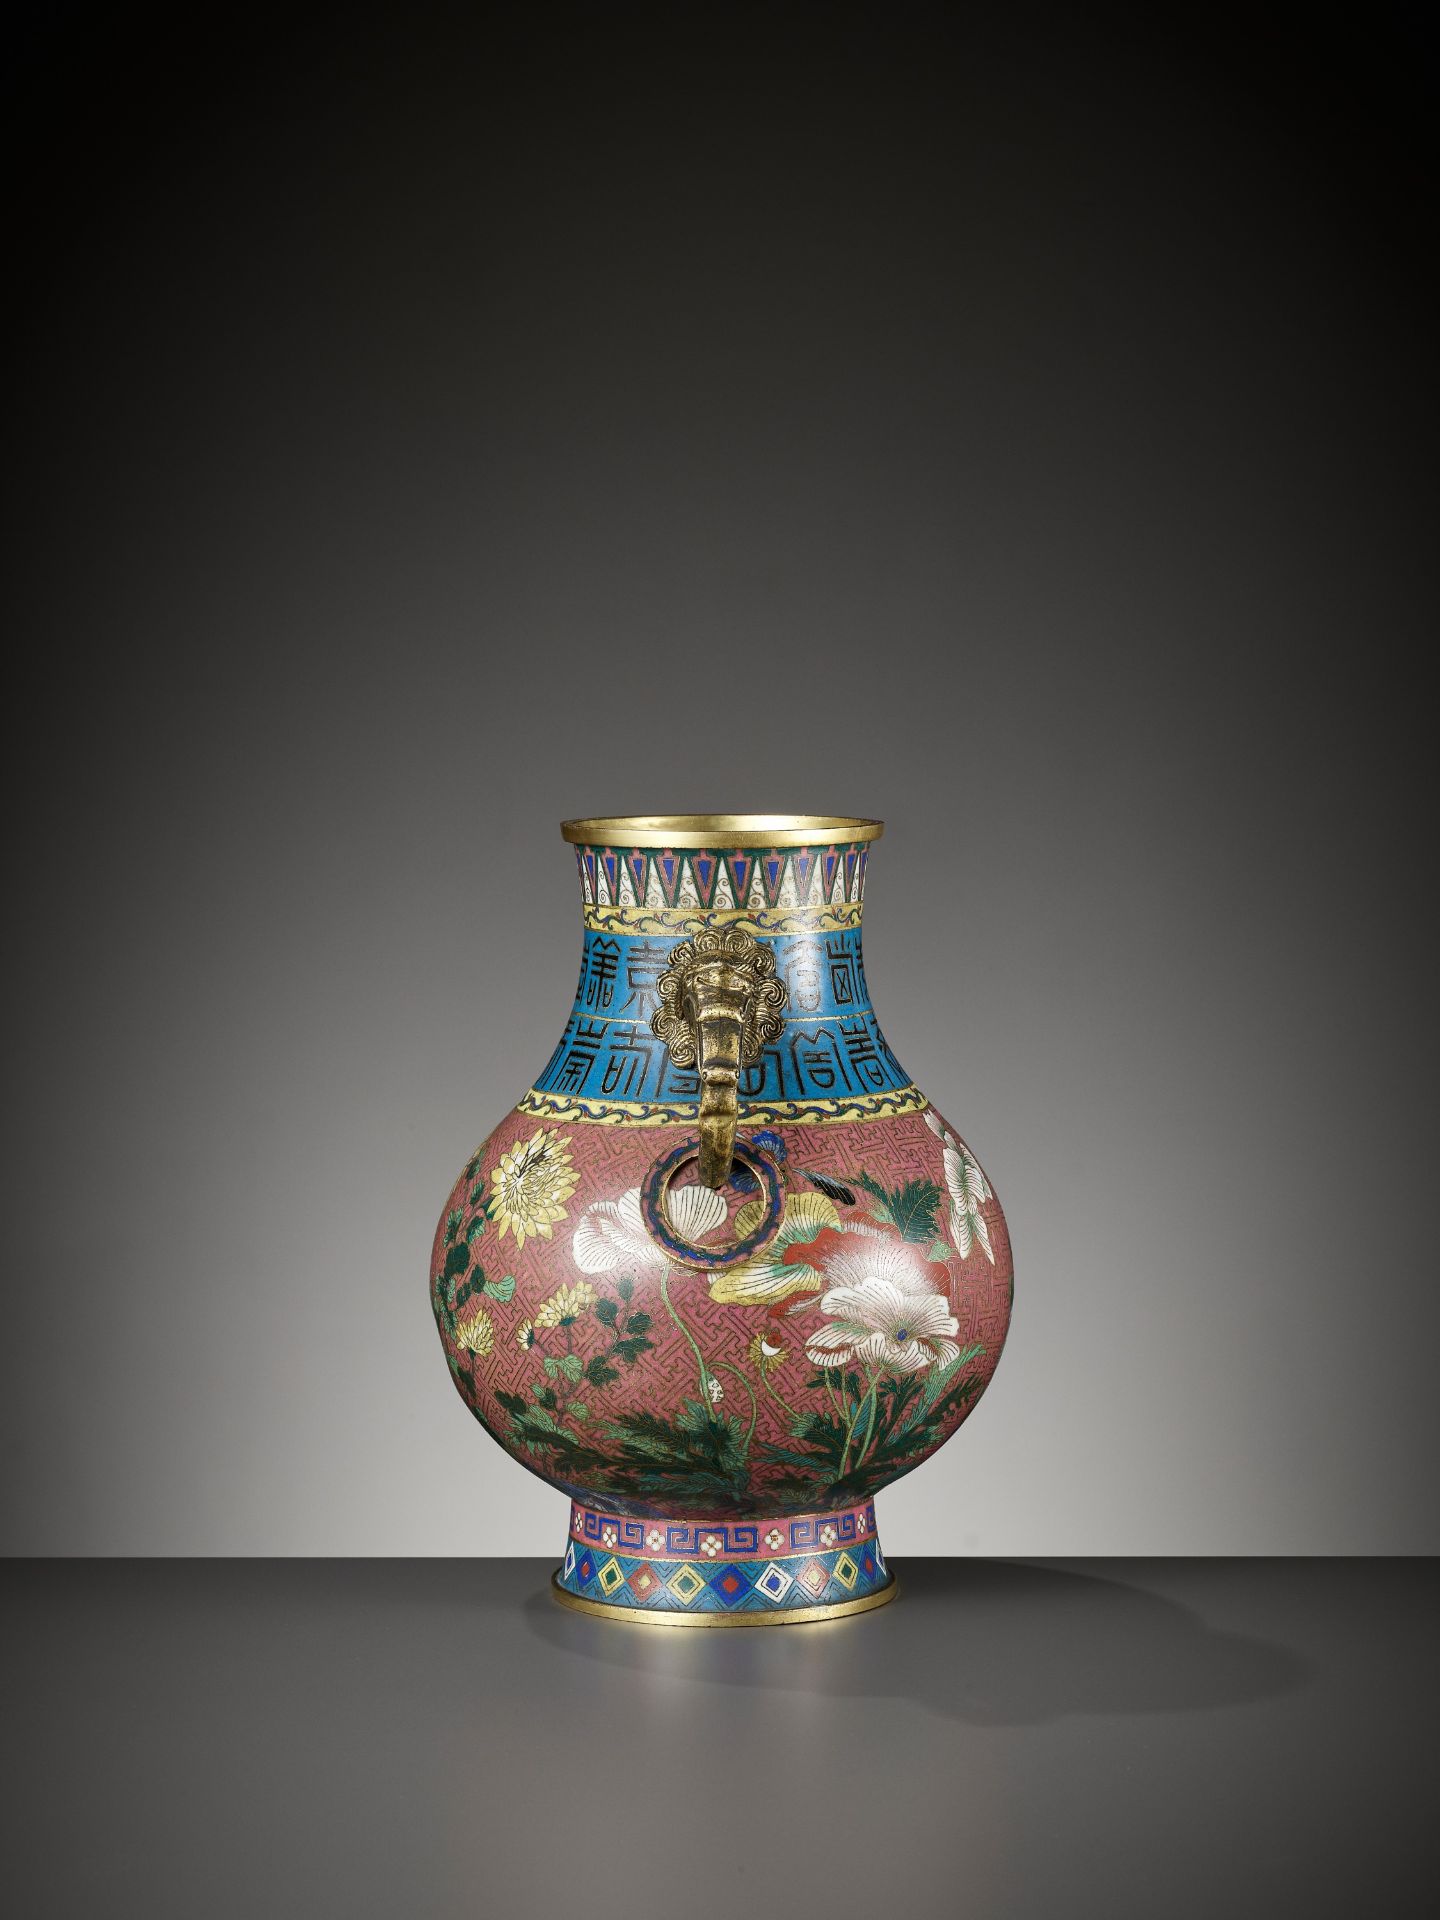 A GILT-BRONZE AND CLOISONNE ENAMEL 'CRICKET' VASE, HU, JIAQING PERIOD - Image 9 of 14